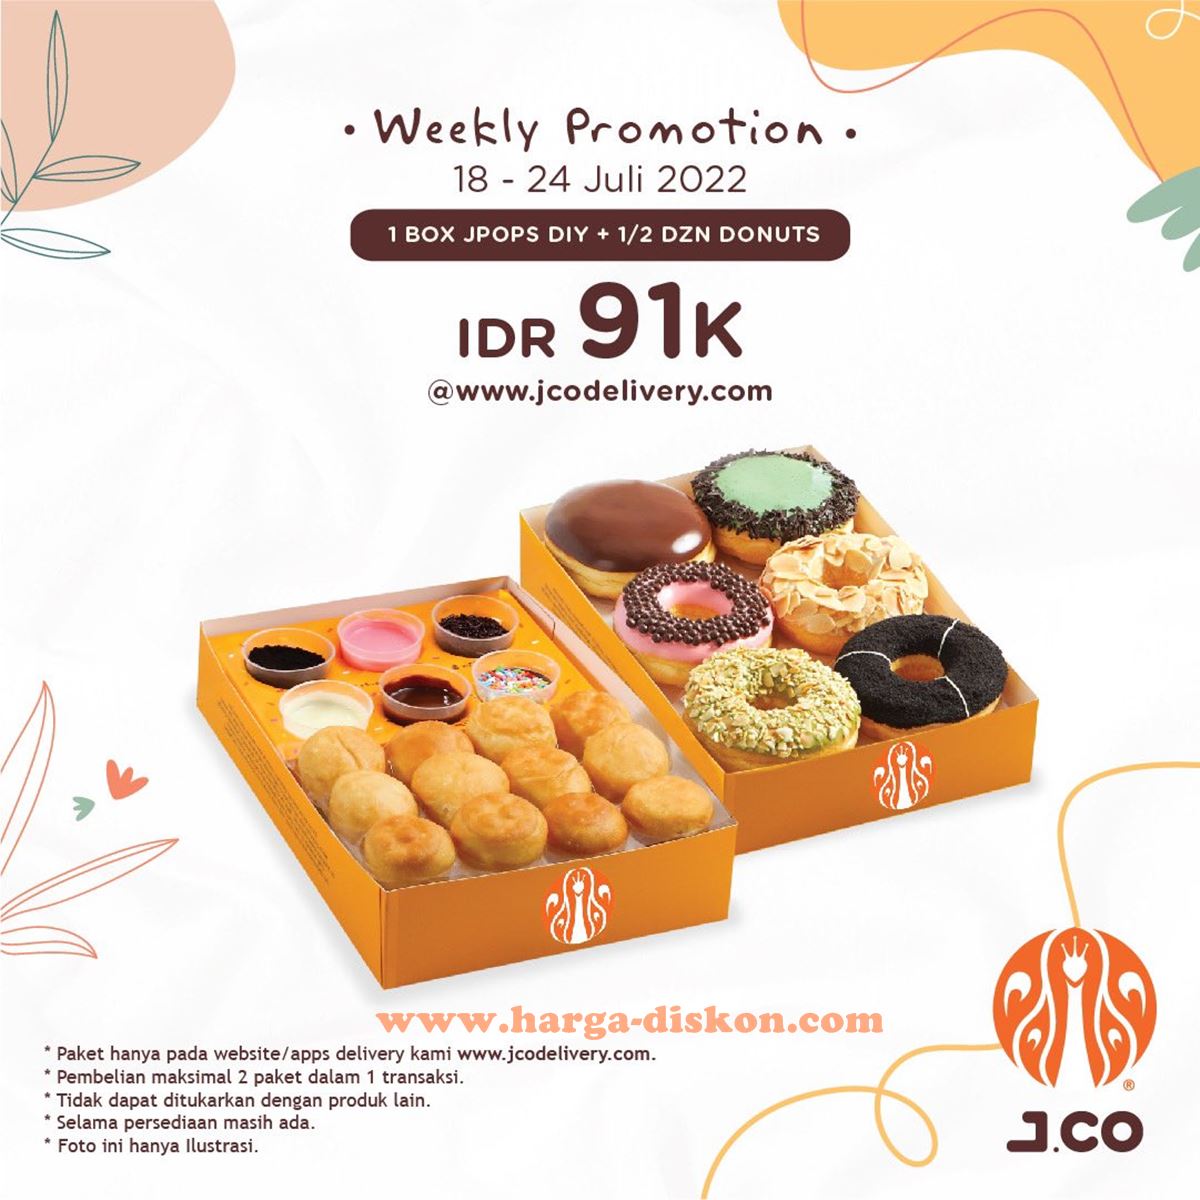 Promo JCO Delivery Weekly Promotion Periode 18 - 24 Juli 2022